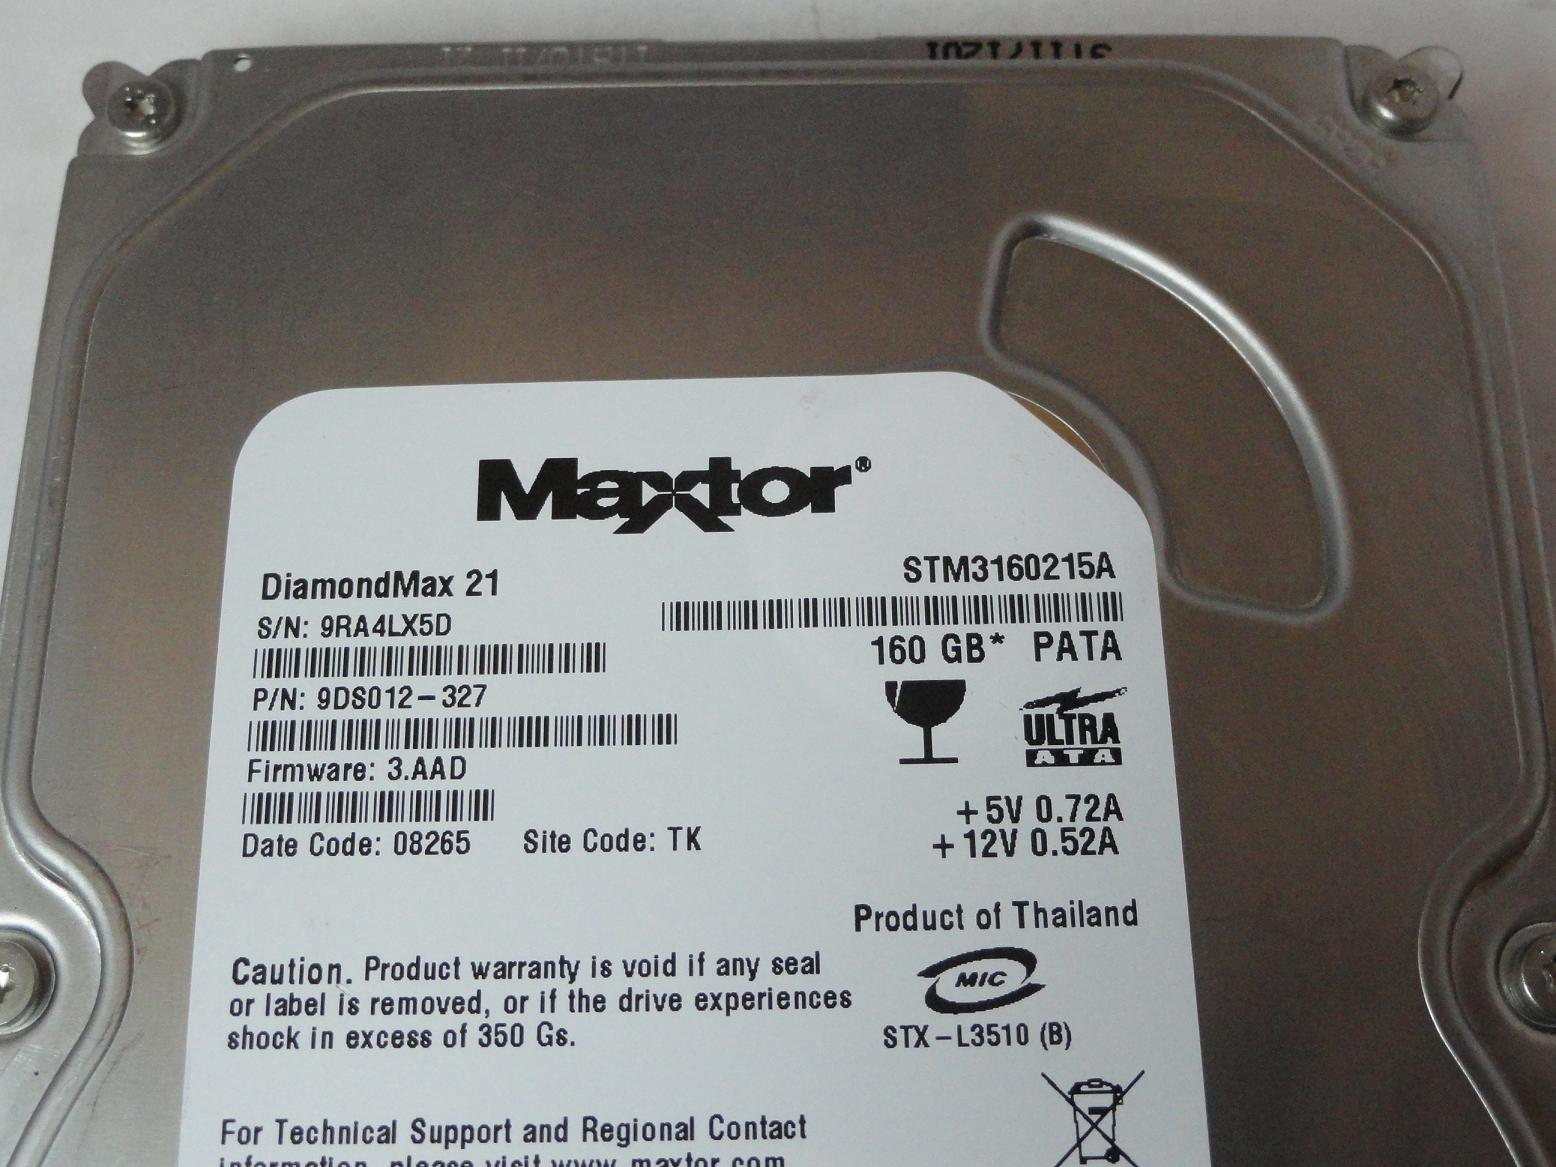 PR23606_9DS012-327_Maxtor 160GB IDE 7200rpm 3.5in HDD - Image3